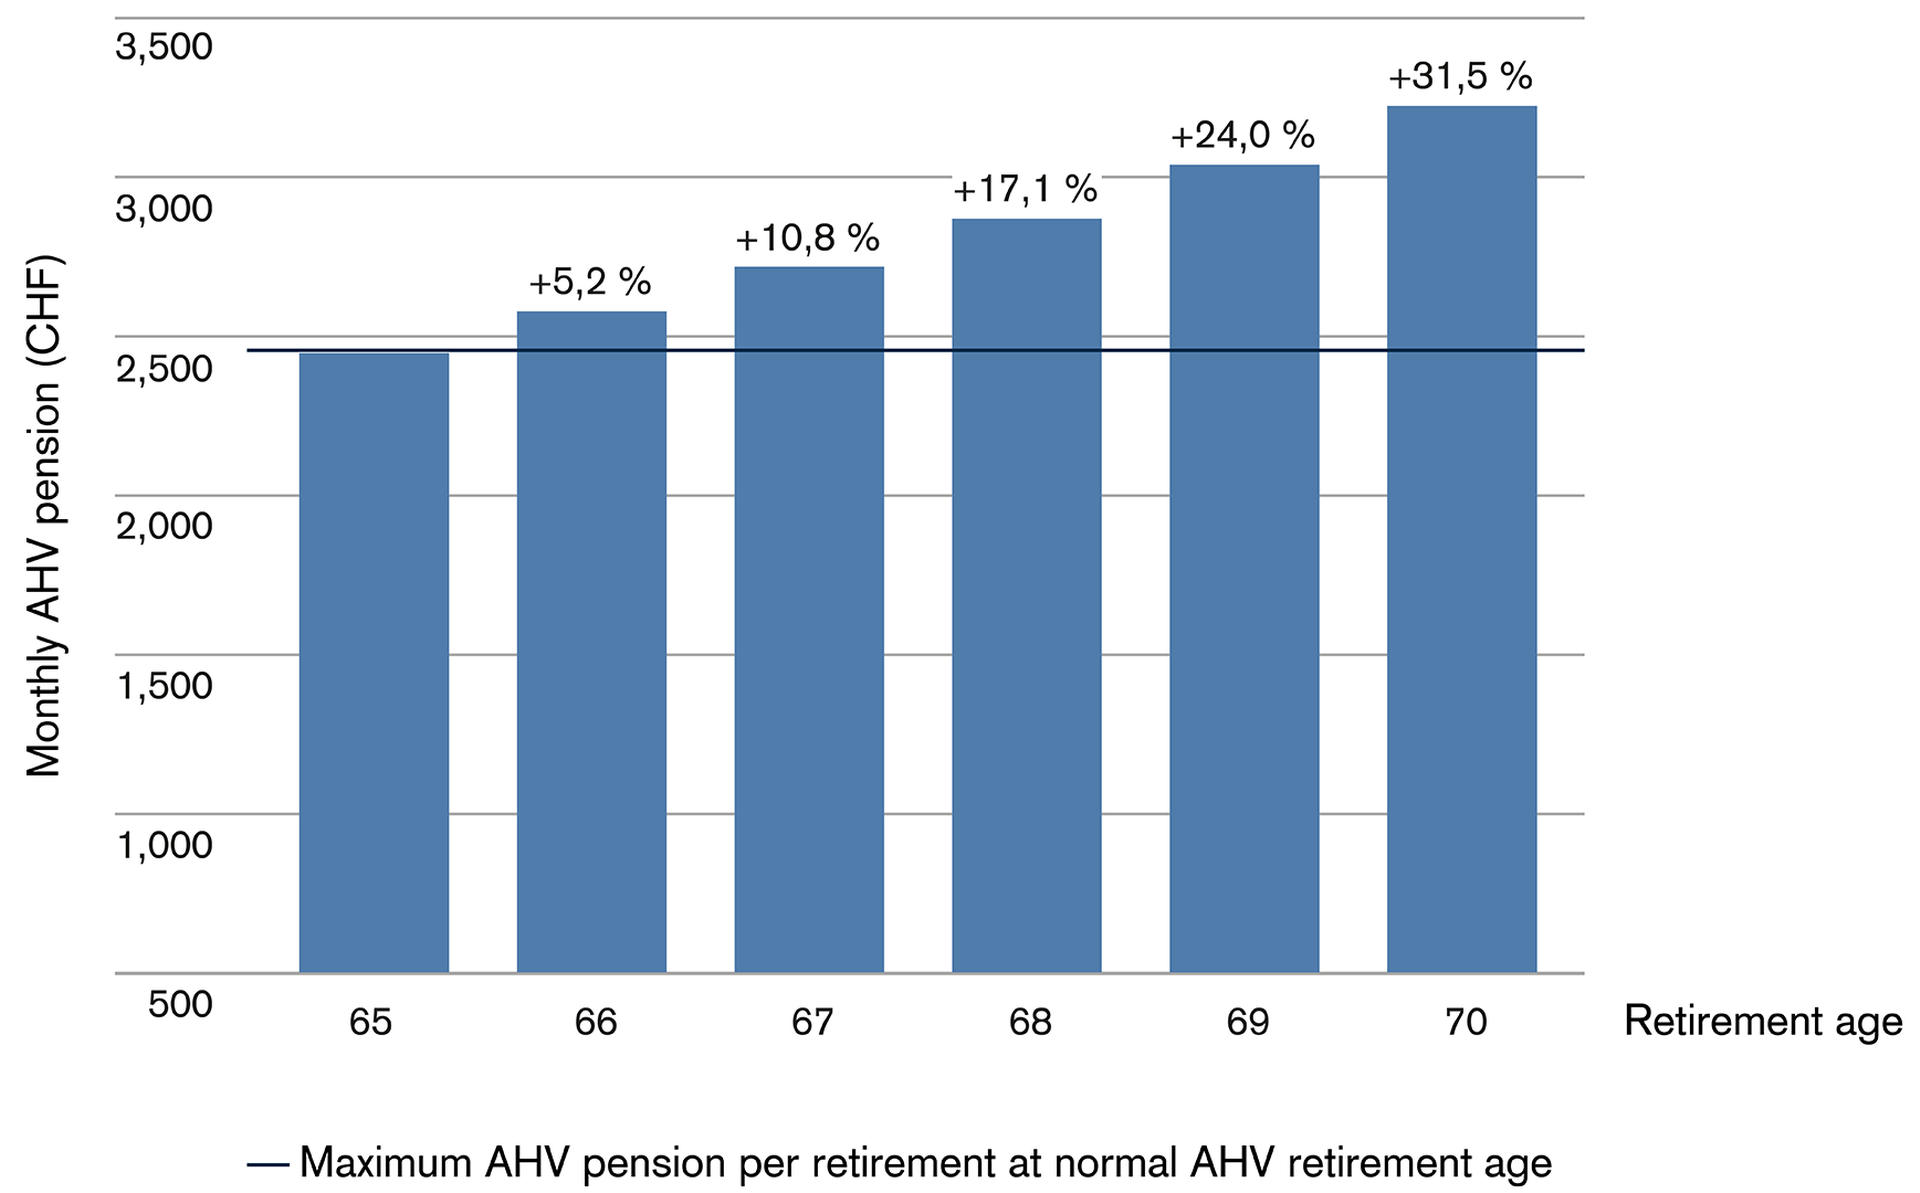 Deferring the AHV pension: How the pension increases